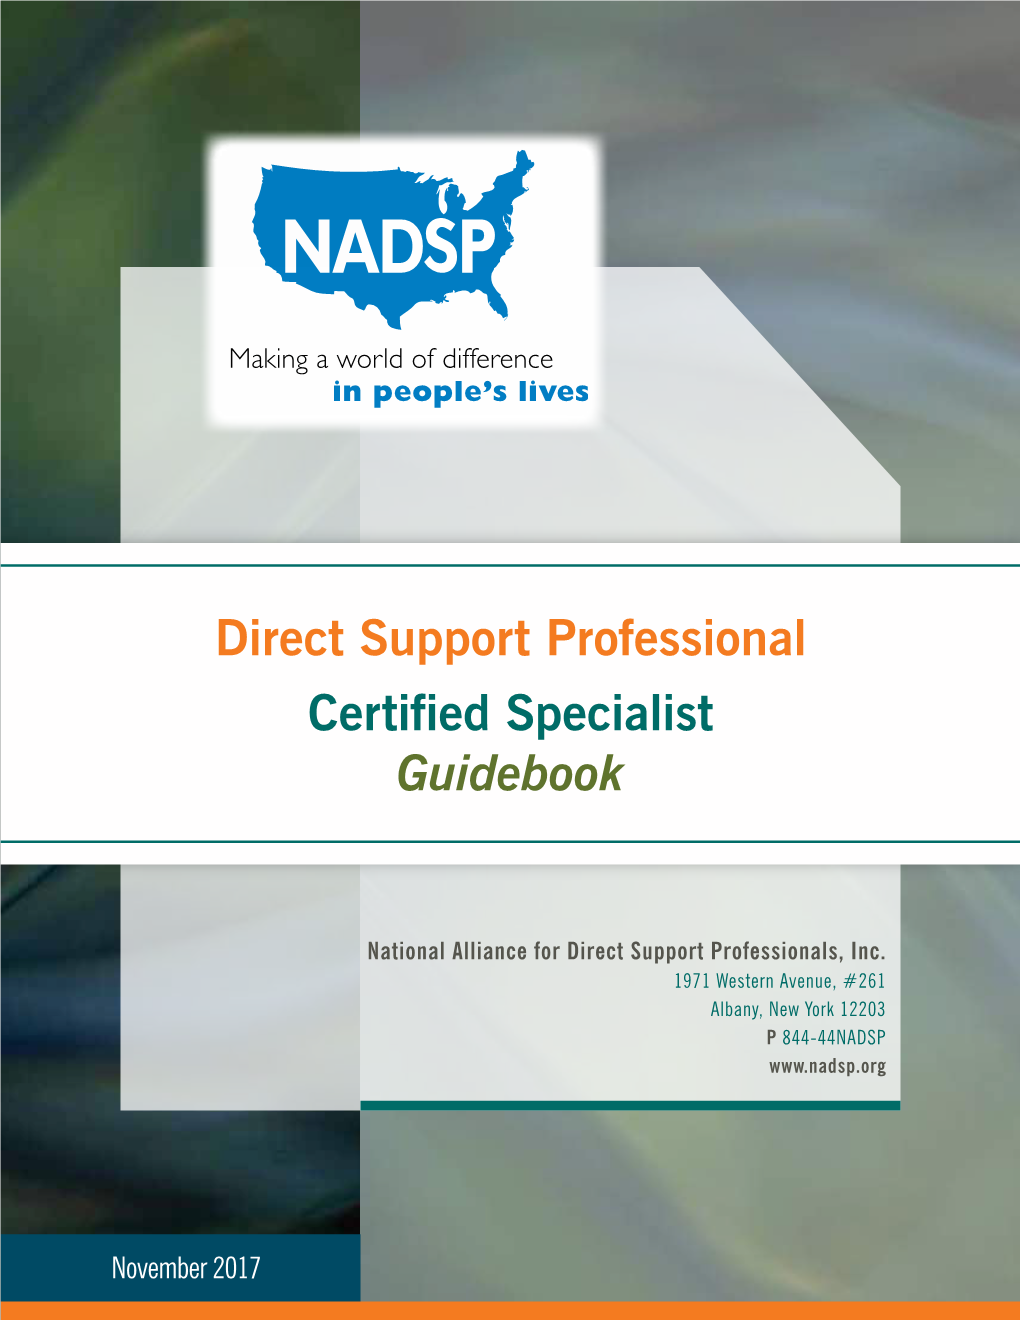 Direct Support Professional Certified Specialist Guidebook